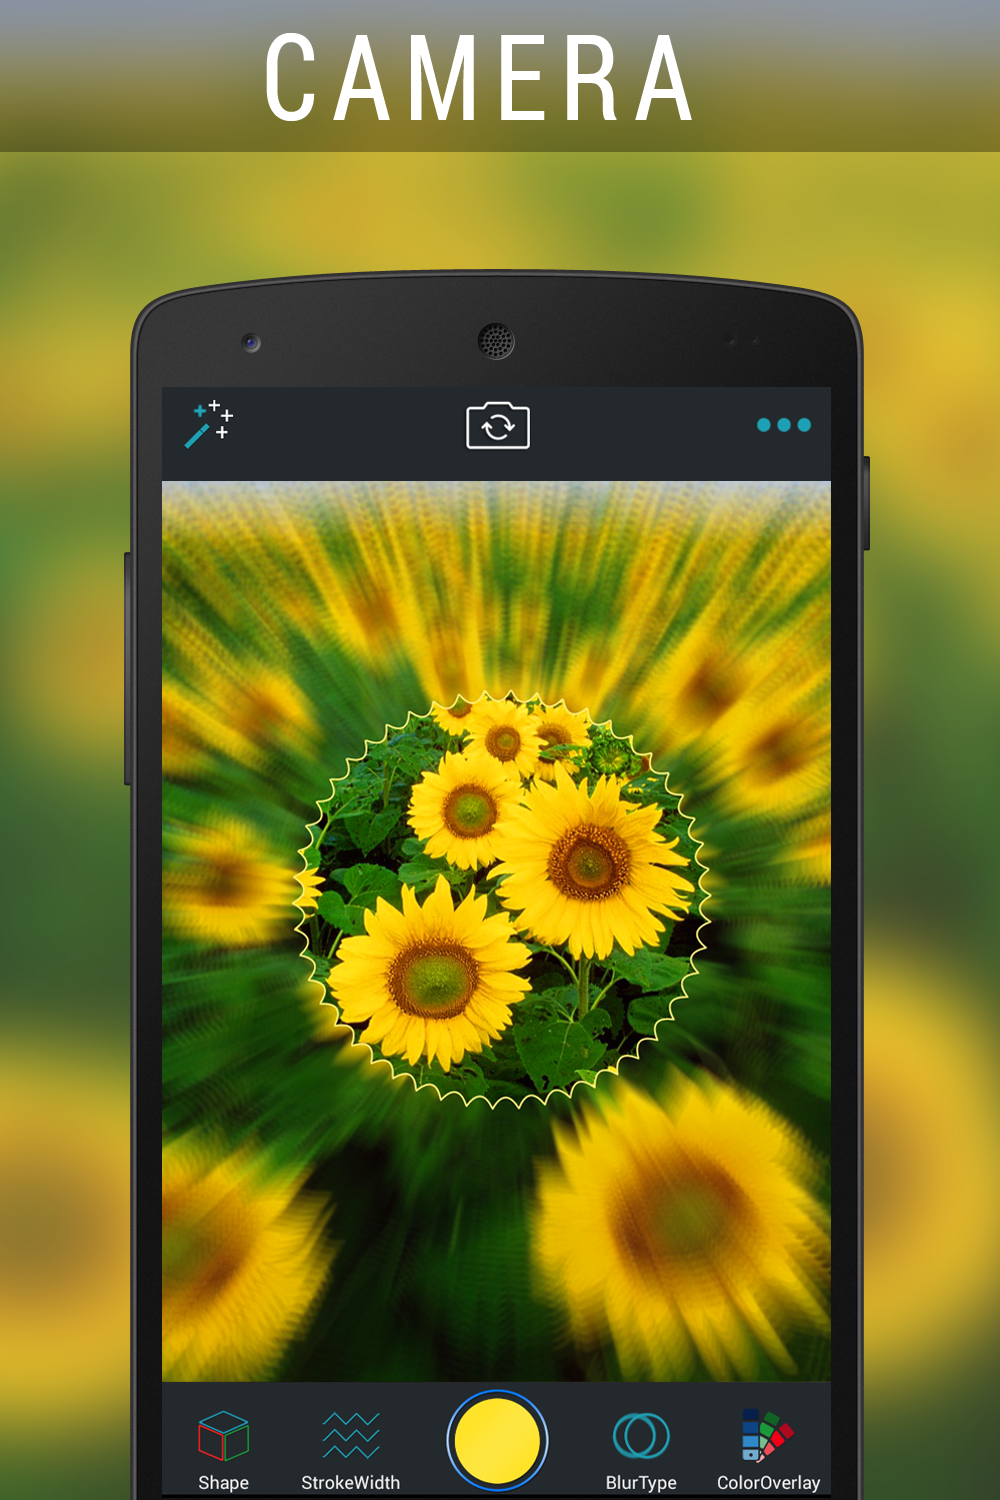 overam uses geometry to reshape photo editing on android camera 2